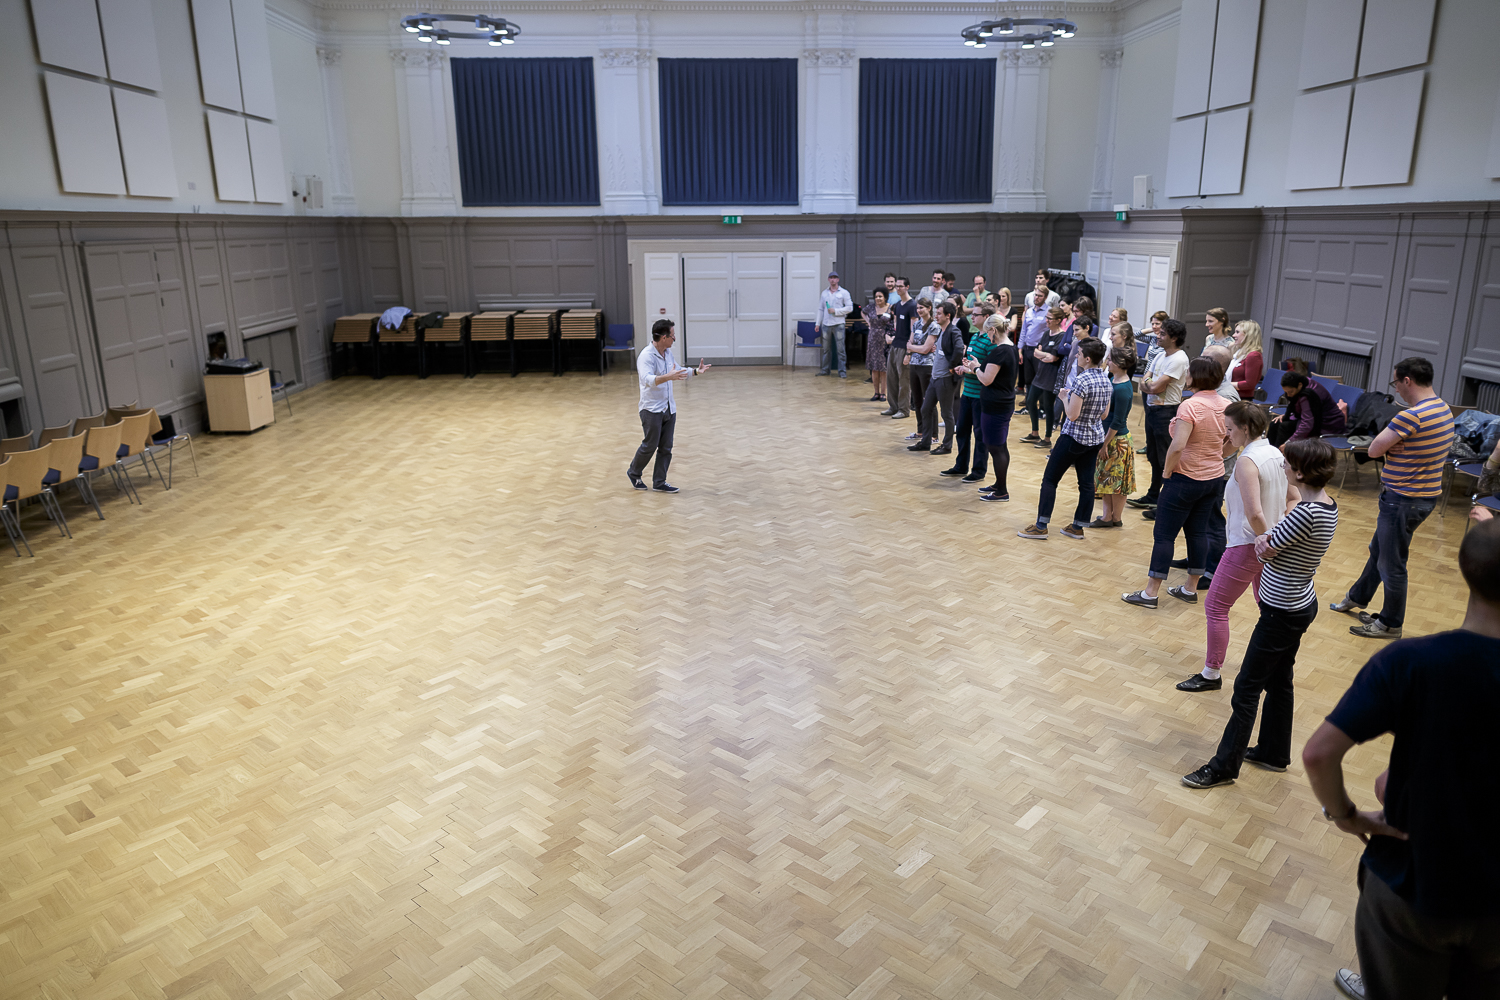  The London Swing Festival 2015. Photo Credit: For Dancers Only (http://d.pr/1fEEY) - http://www.ebobrie.com/london-swing-festival-2015/ 